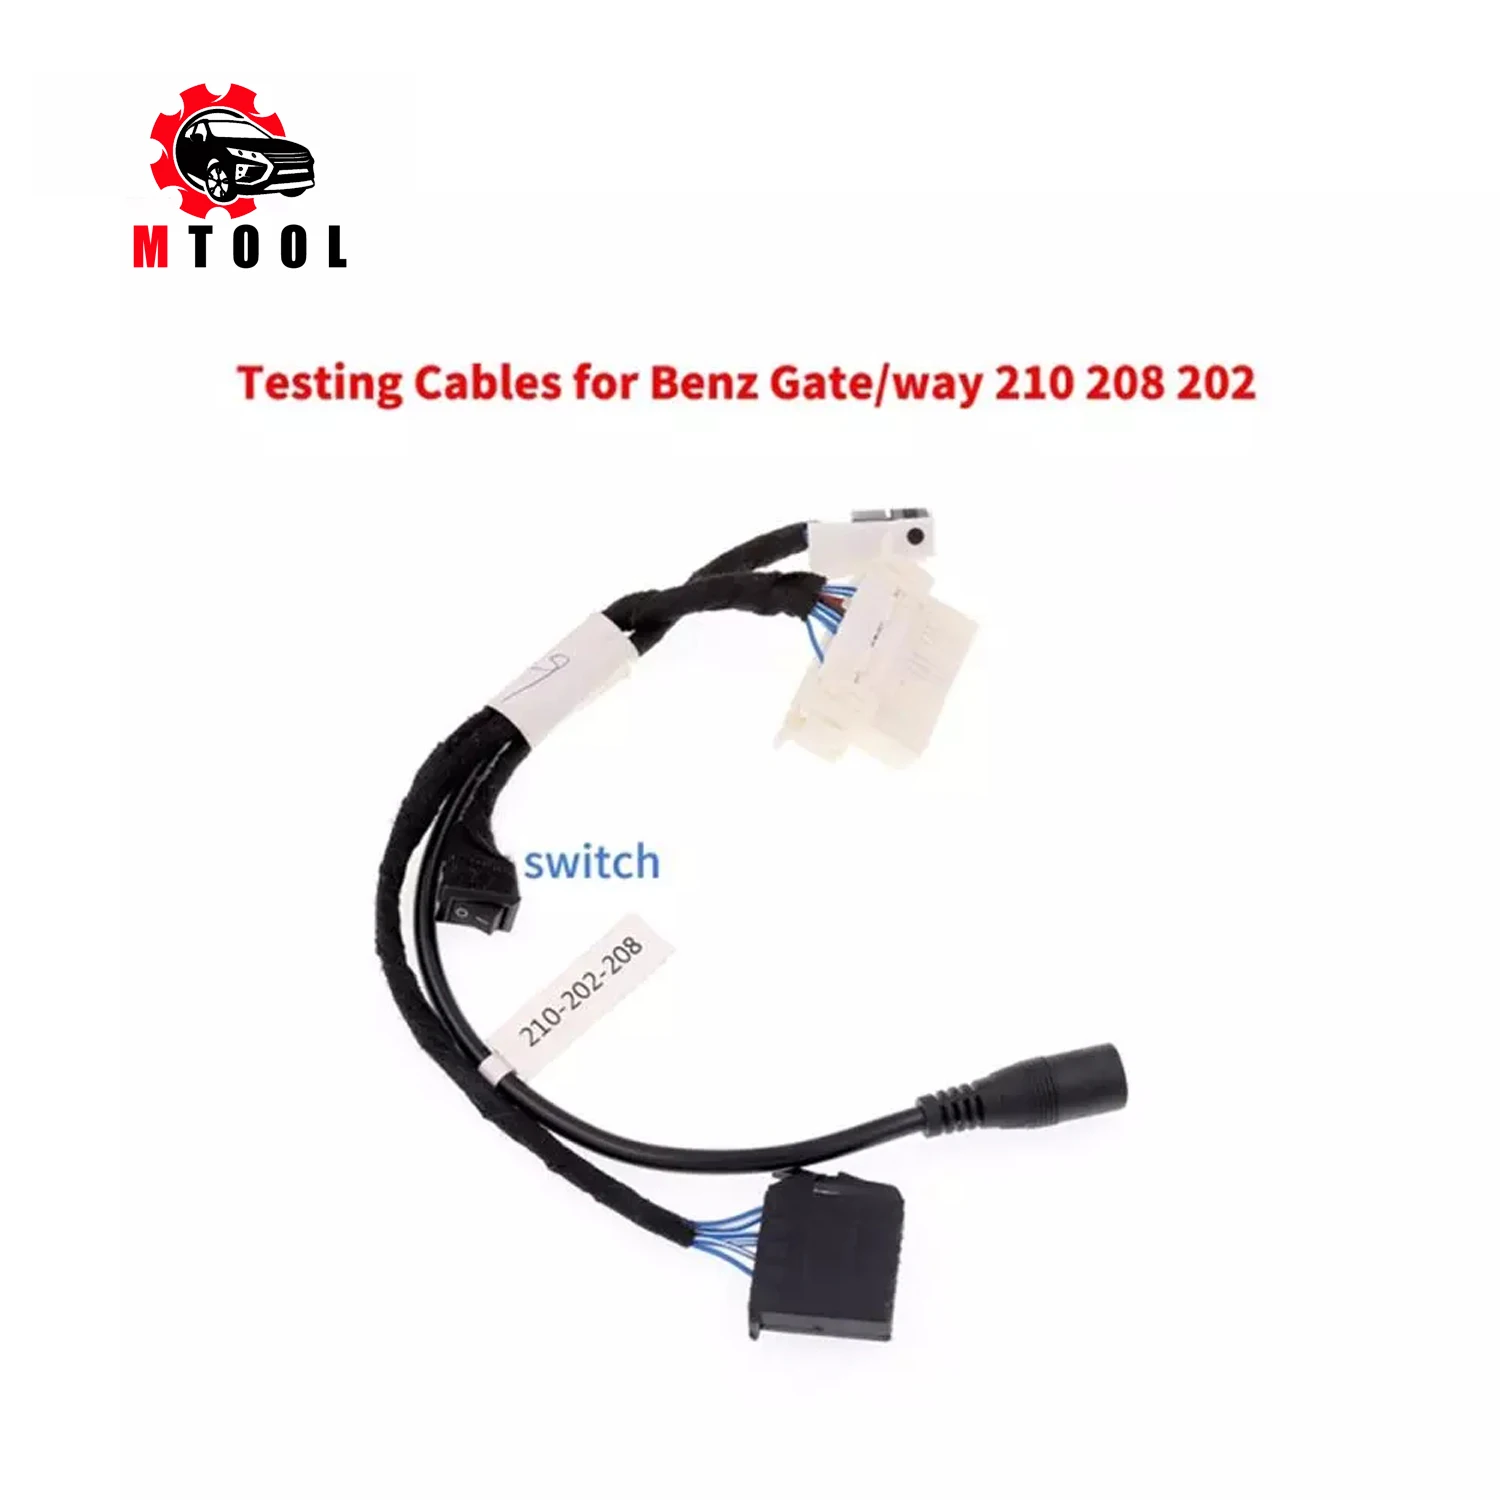 

Testing Cables for Benz Gate/way 210 208 202Cable test for Benz Gate / way 210 208 202 Works with CGDI MB BGA TOOL